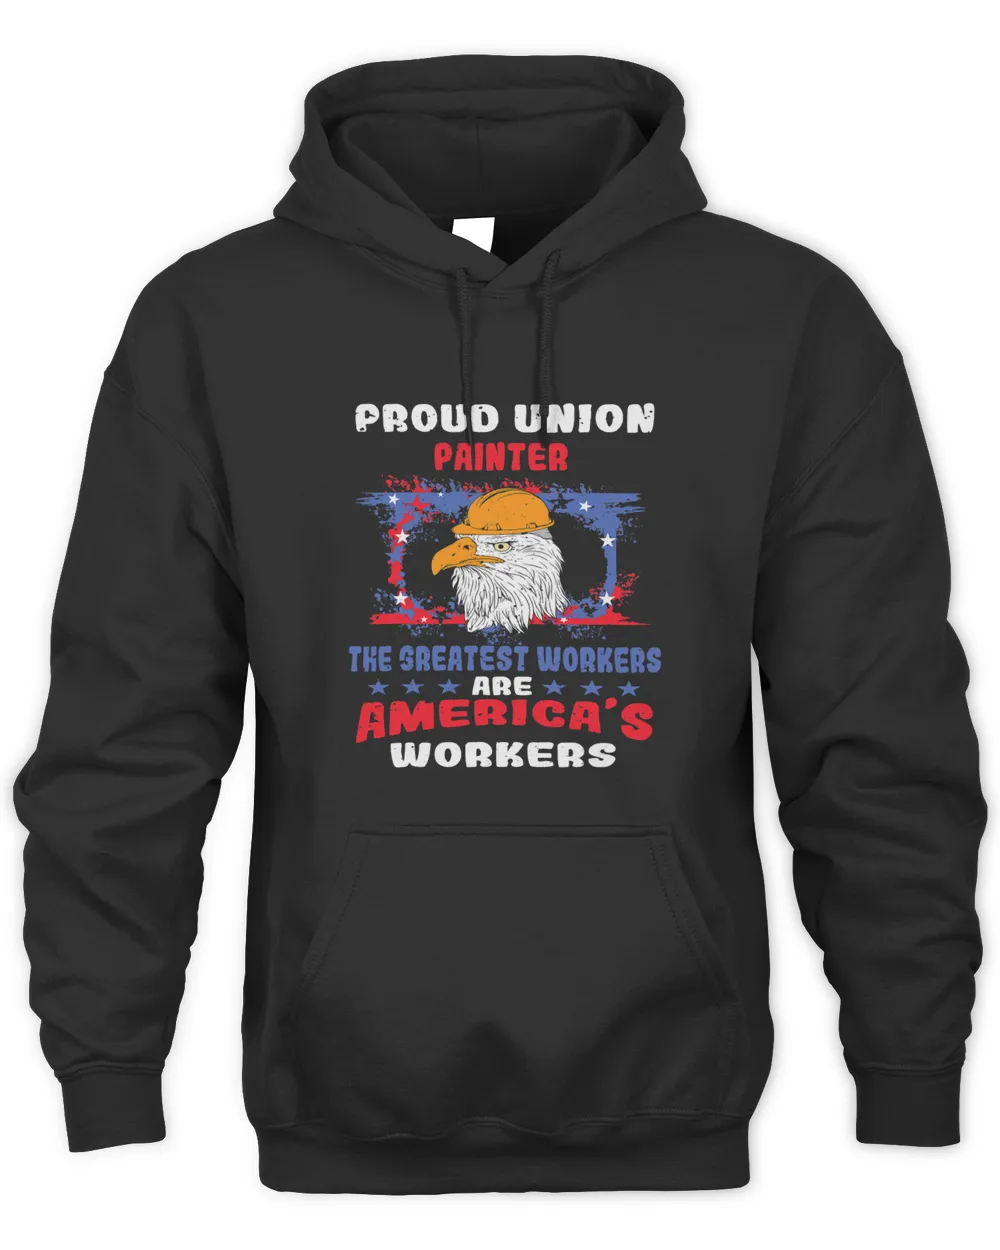 Union Painter Tshirt For Patriotic Workers